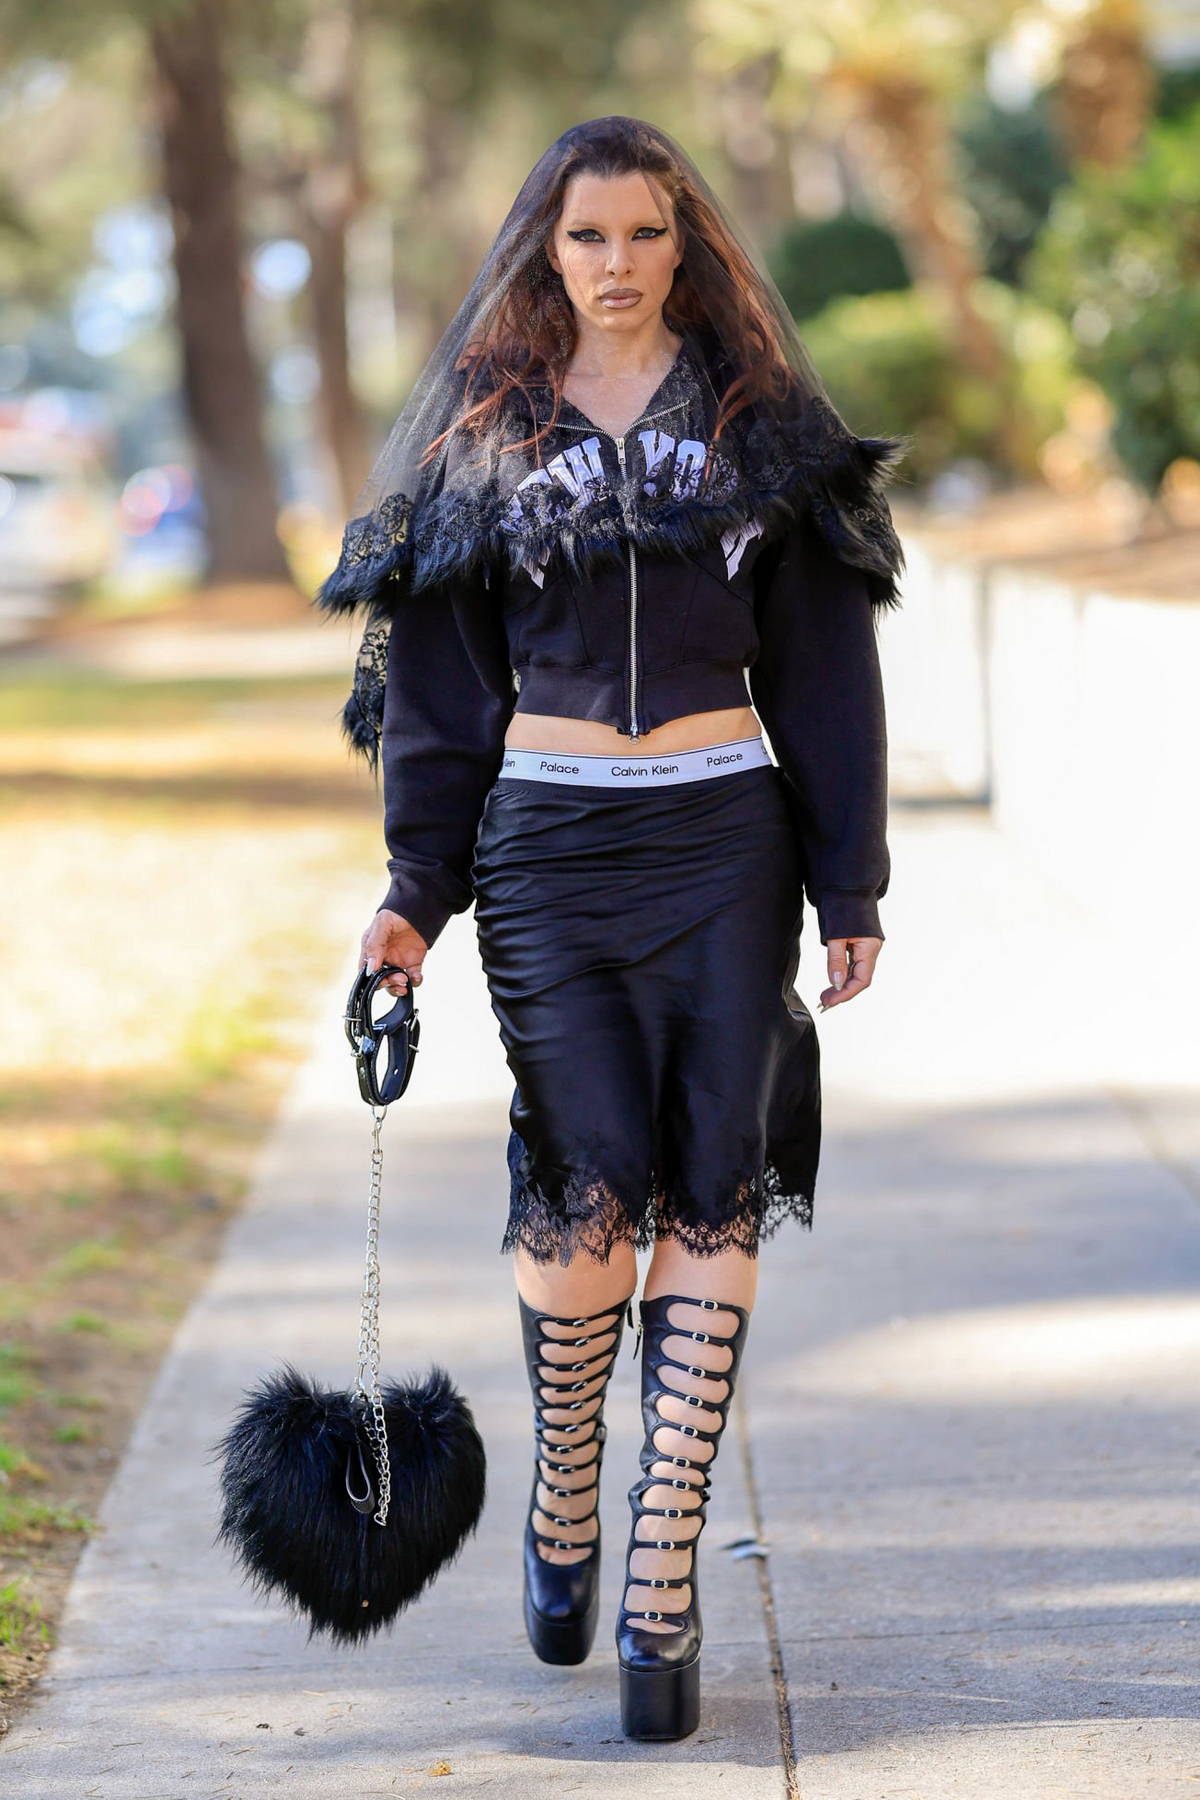 Ella Rose displays her slim figure in a crop top and leggings while out on a